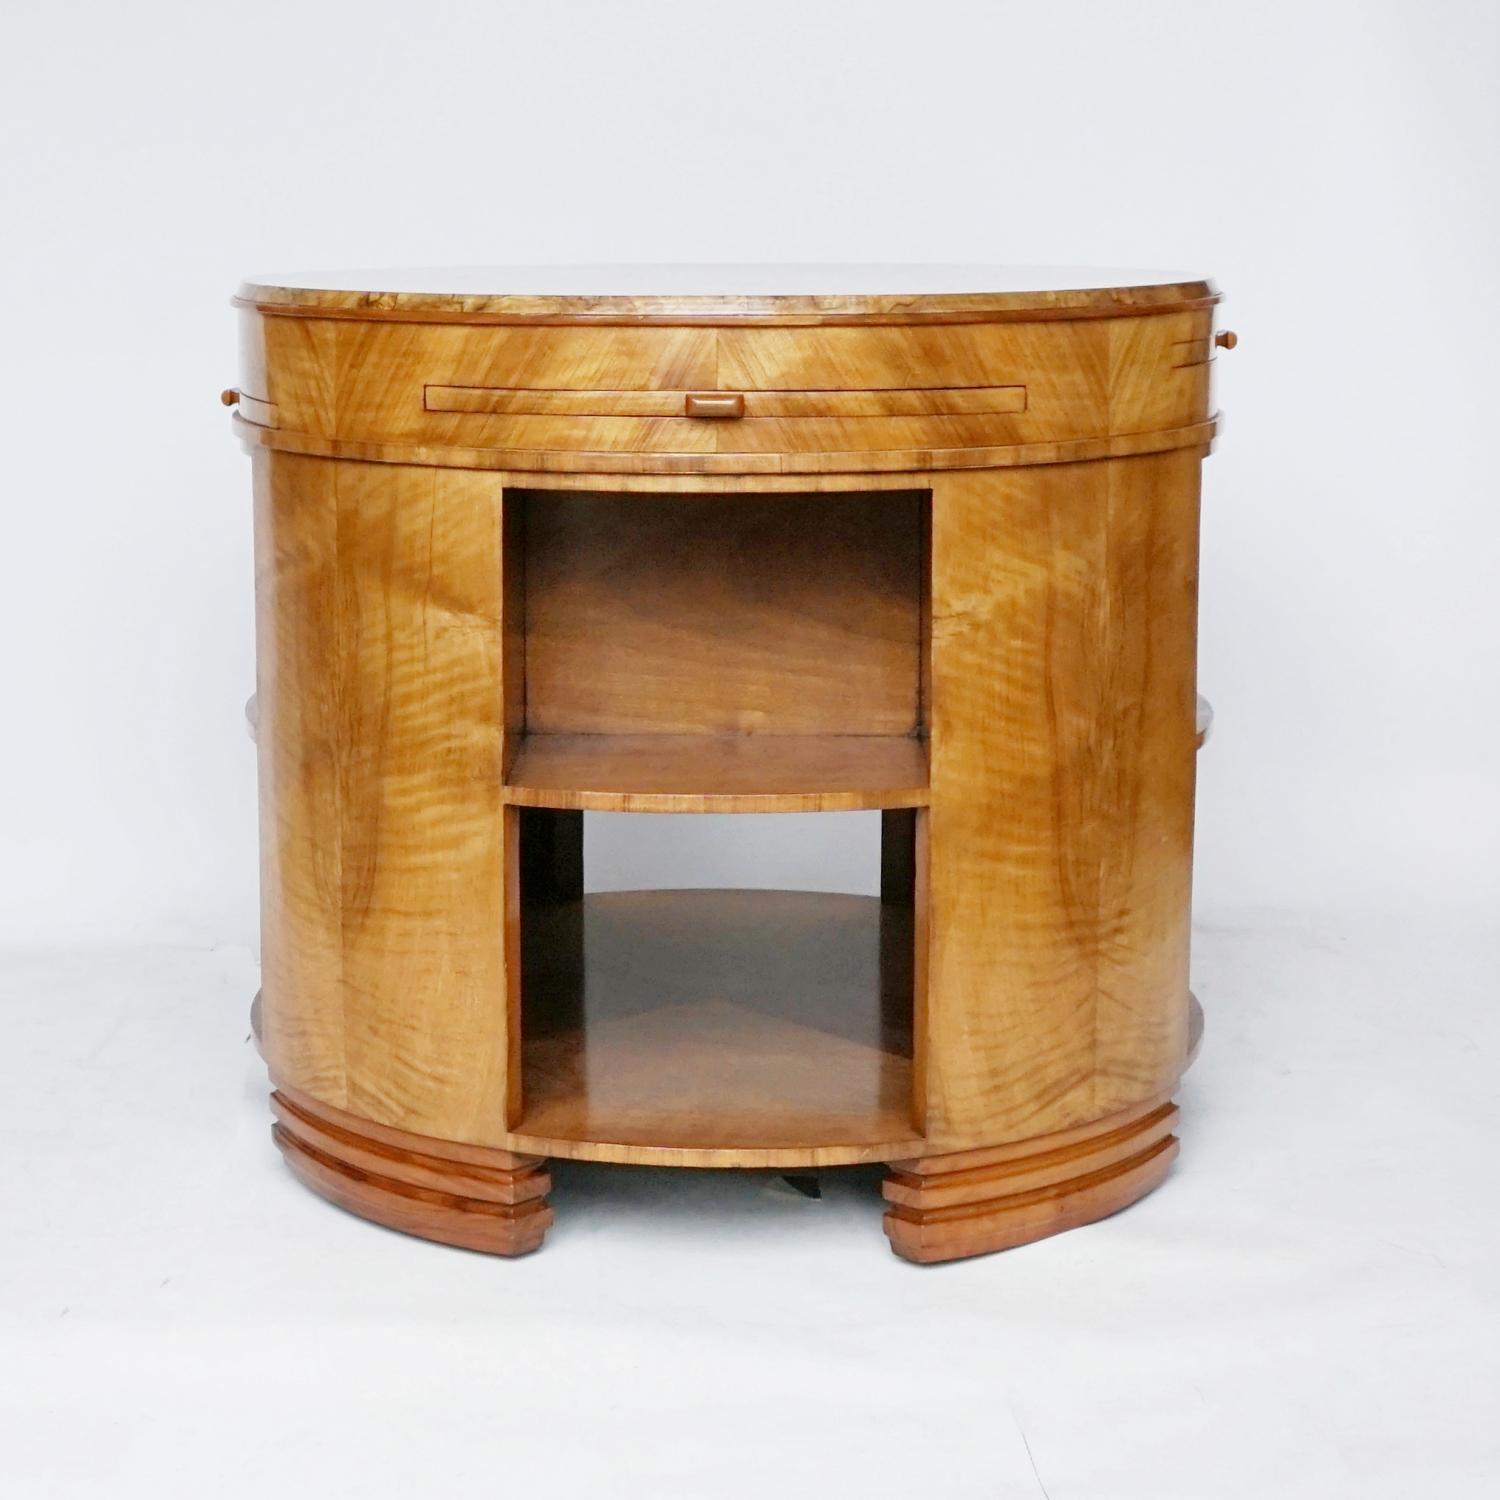 An Art Deco library table retailed by Heal's of London. Circular table with upper book shelves and lower open storage shelf. Four graduating pull out trays veneered in Birdseye Maple. Fantastic burr walnut veneered top with Figured walnut